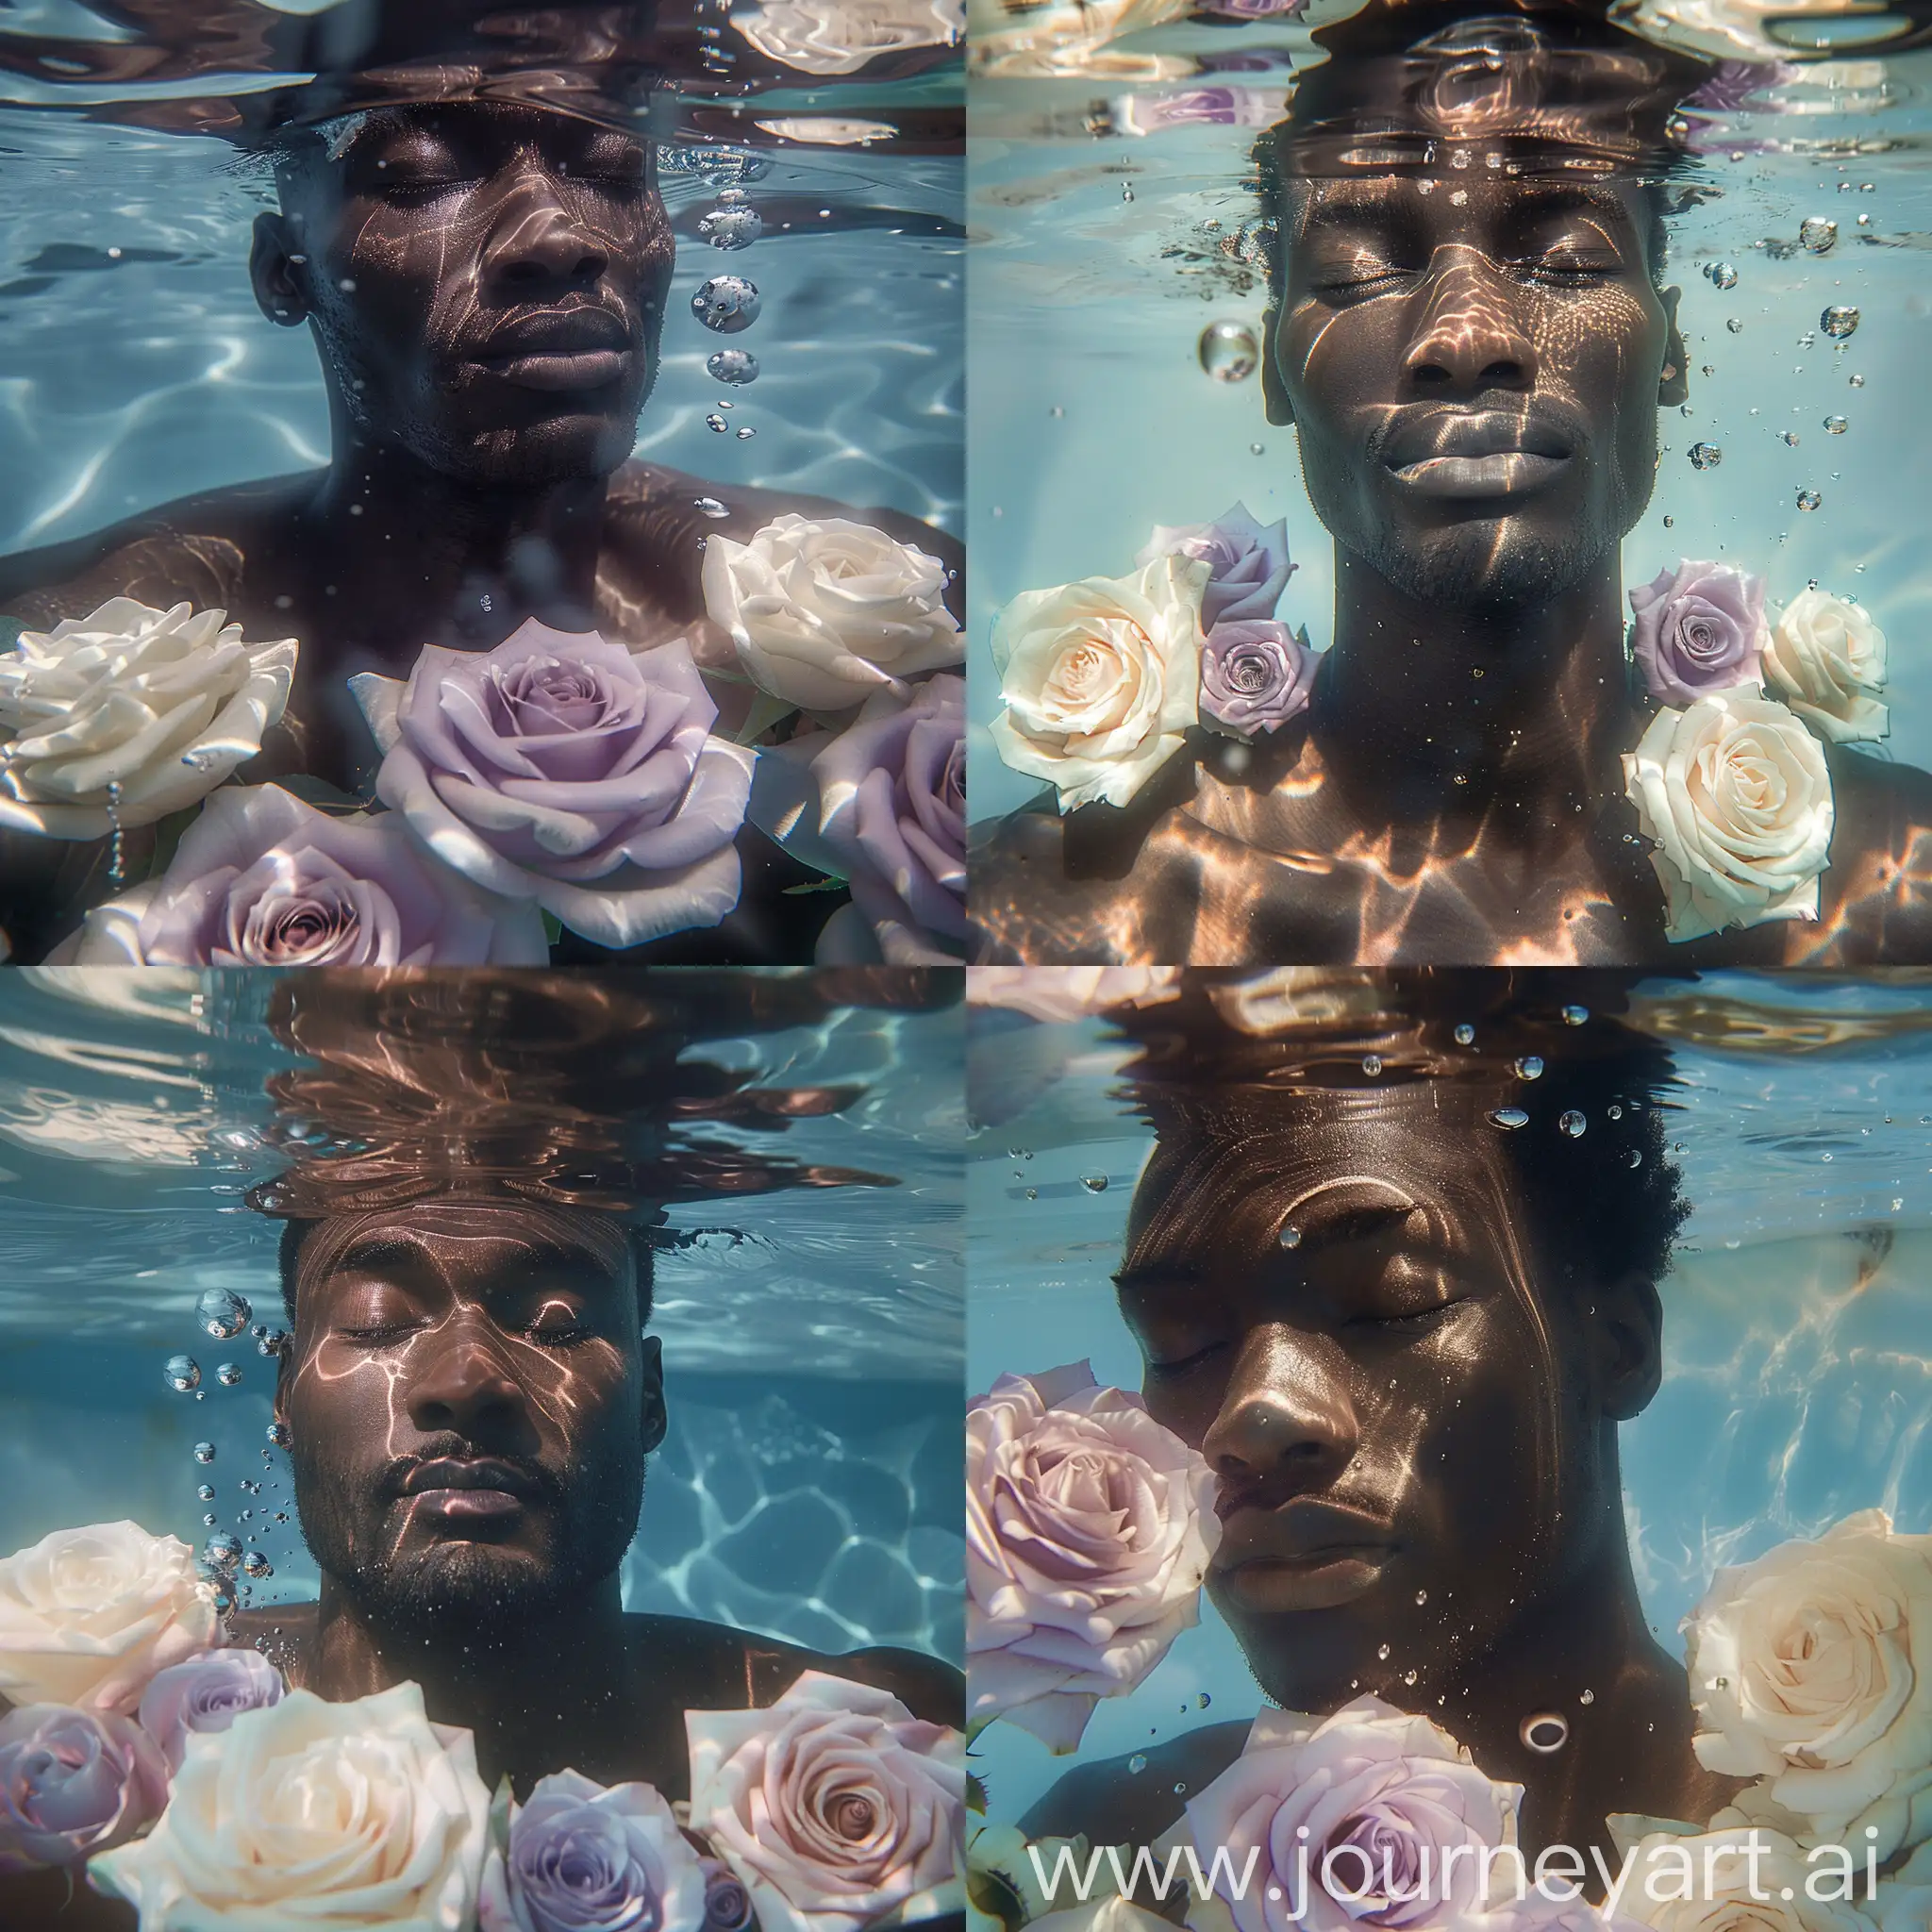 Serene-Black-Man-in-his-50s-Submerged-with-Lilac-and-Cream-Roses